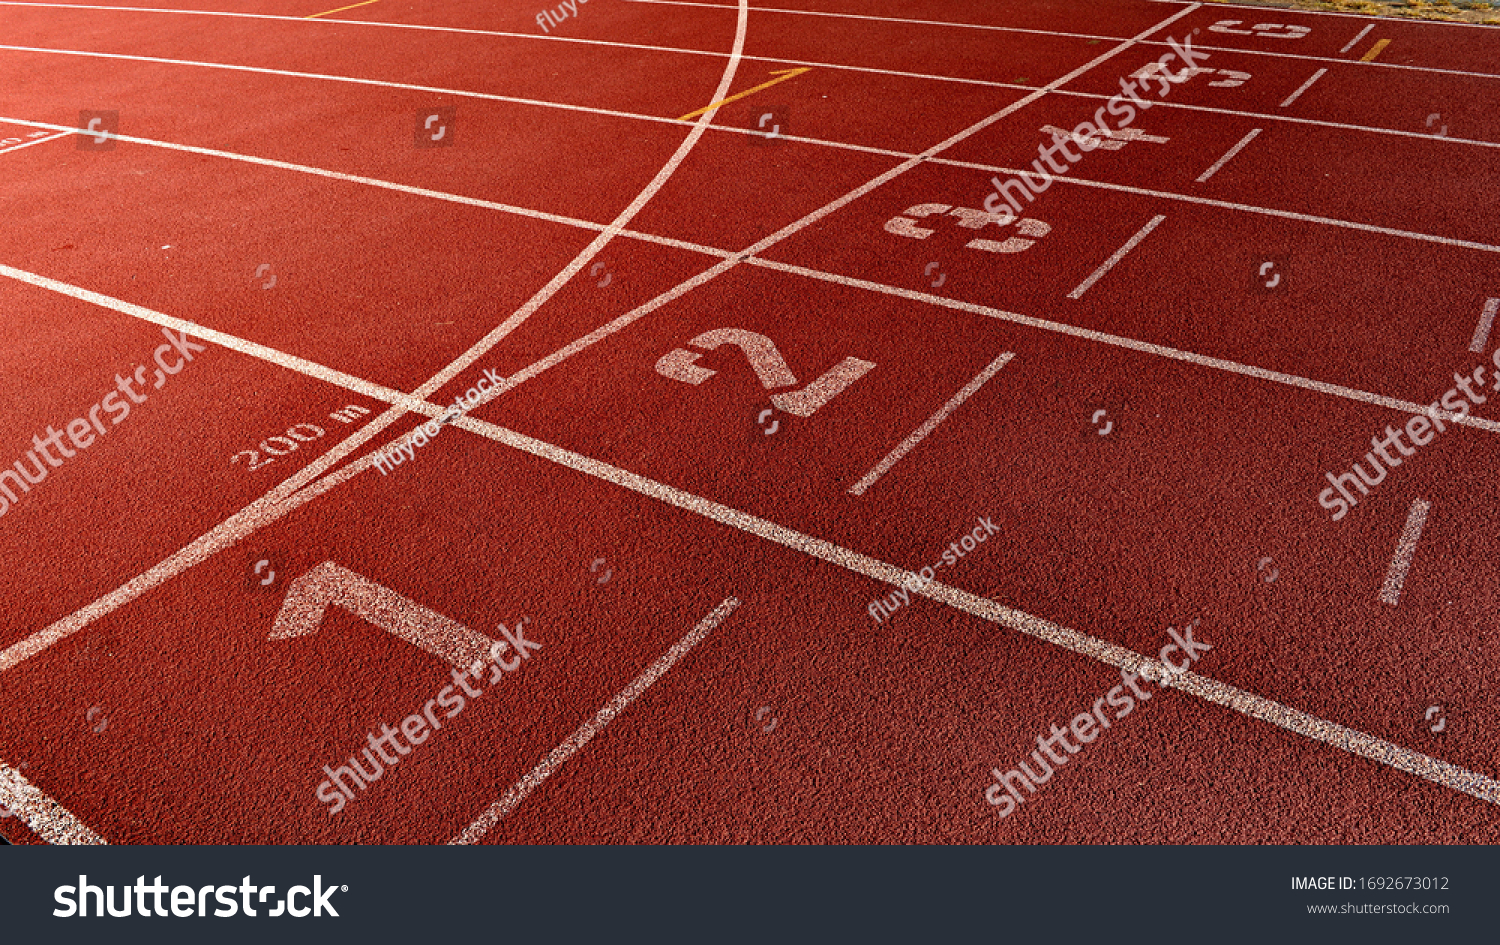 Athletic competitions starting line positions from one to six #1692673012